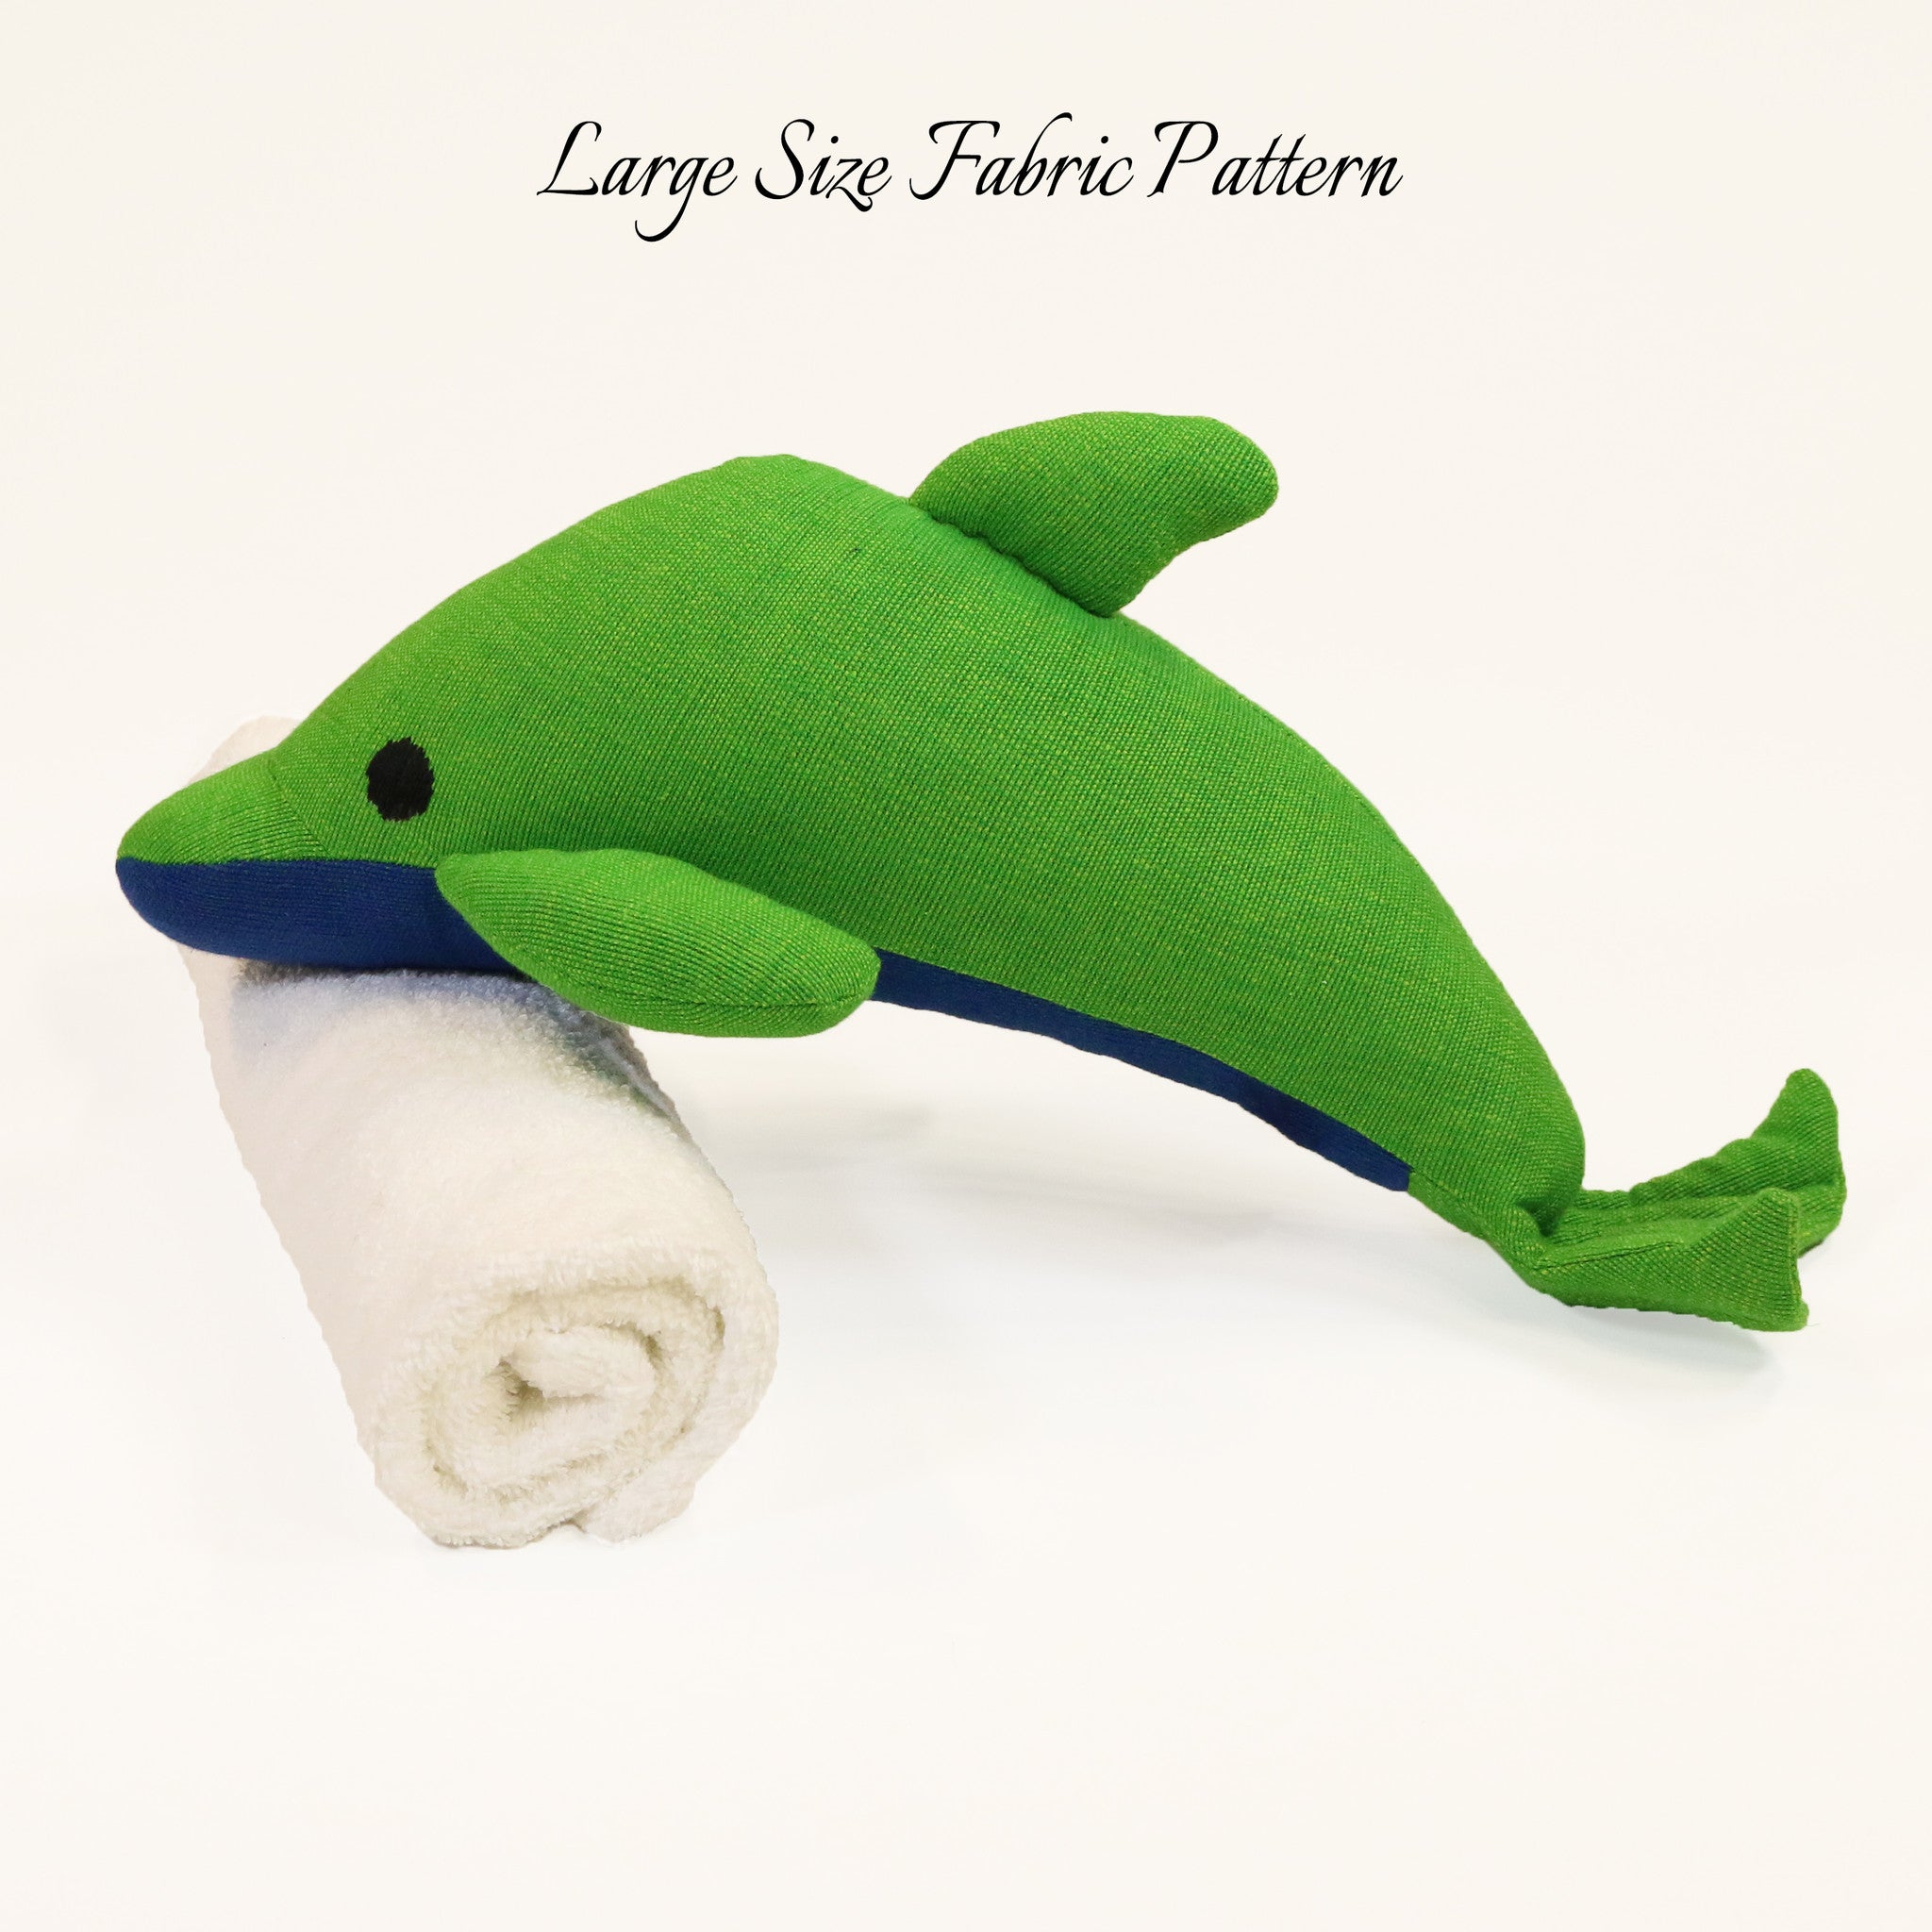 Donny, the Dolphin – large size fabric pattern shown